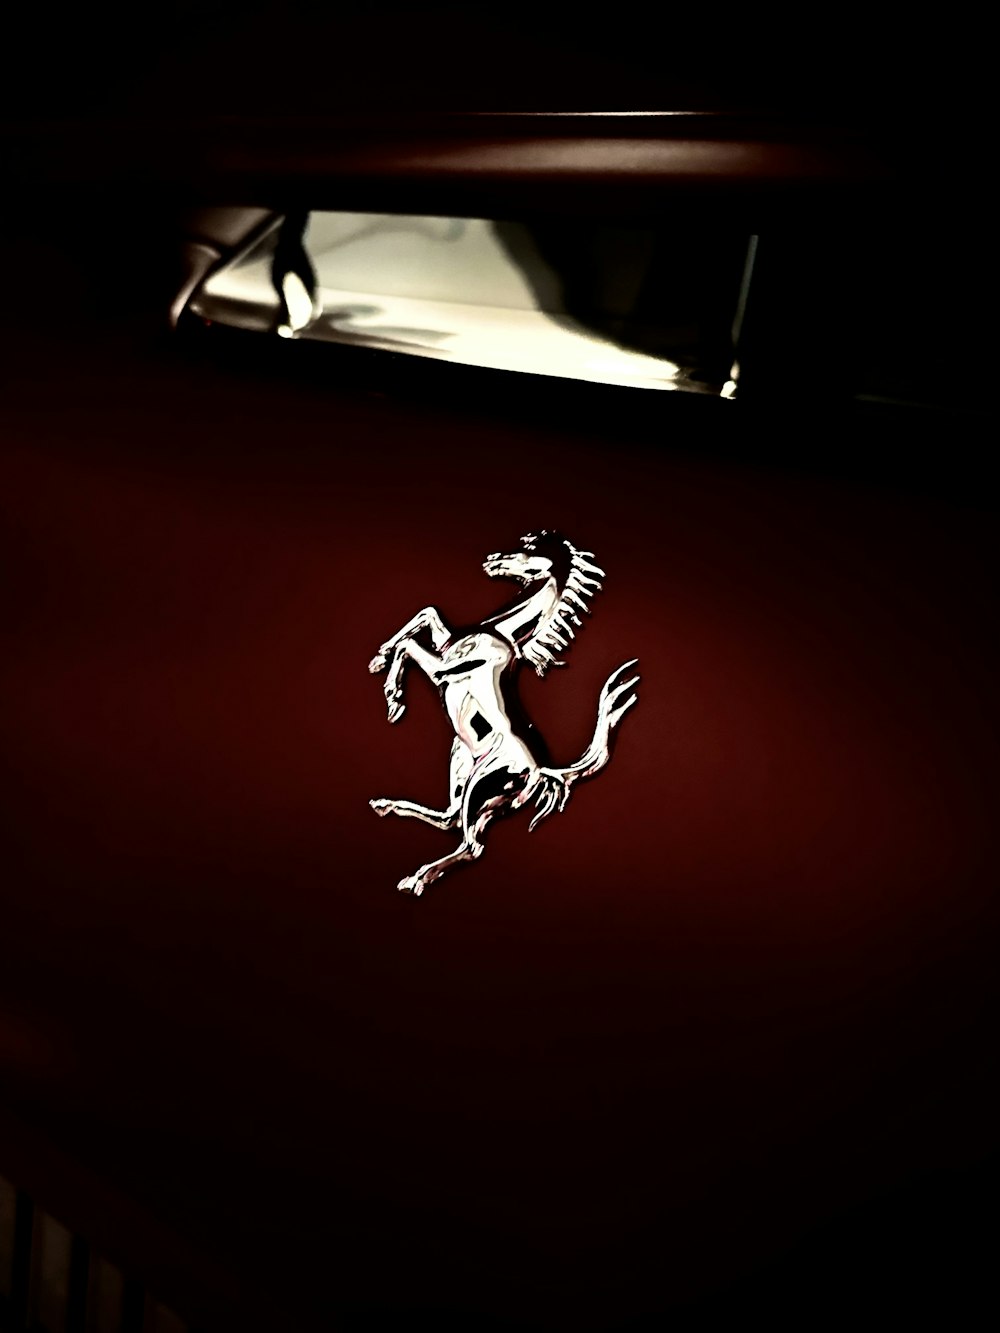 the emblem on the side of a car